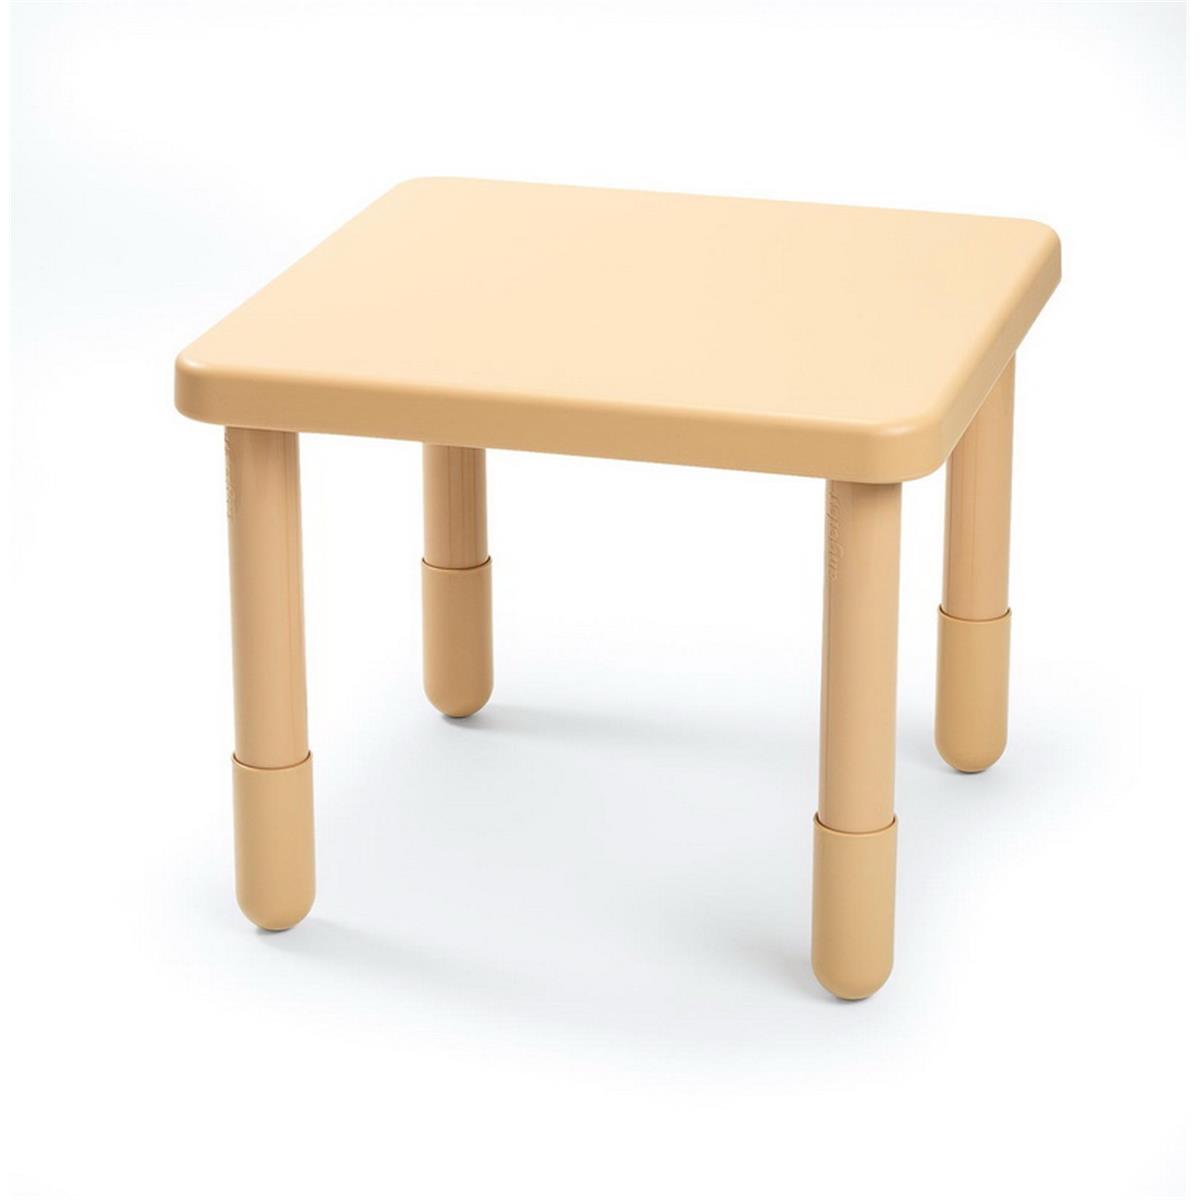 Ab700nt20 28 X 28 X 20 In. Value Square Table With Legs, Natural Tan